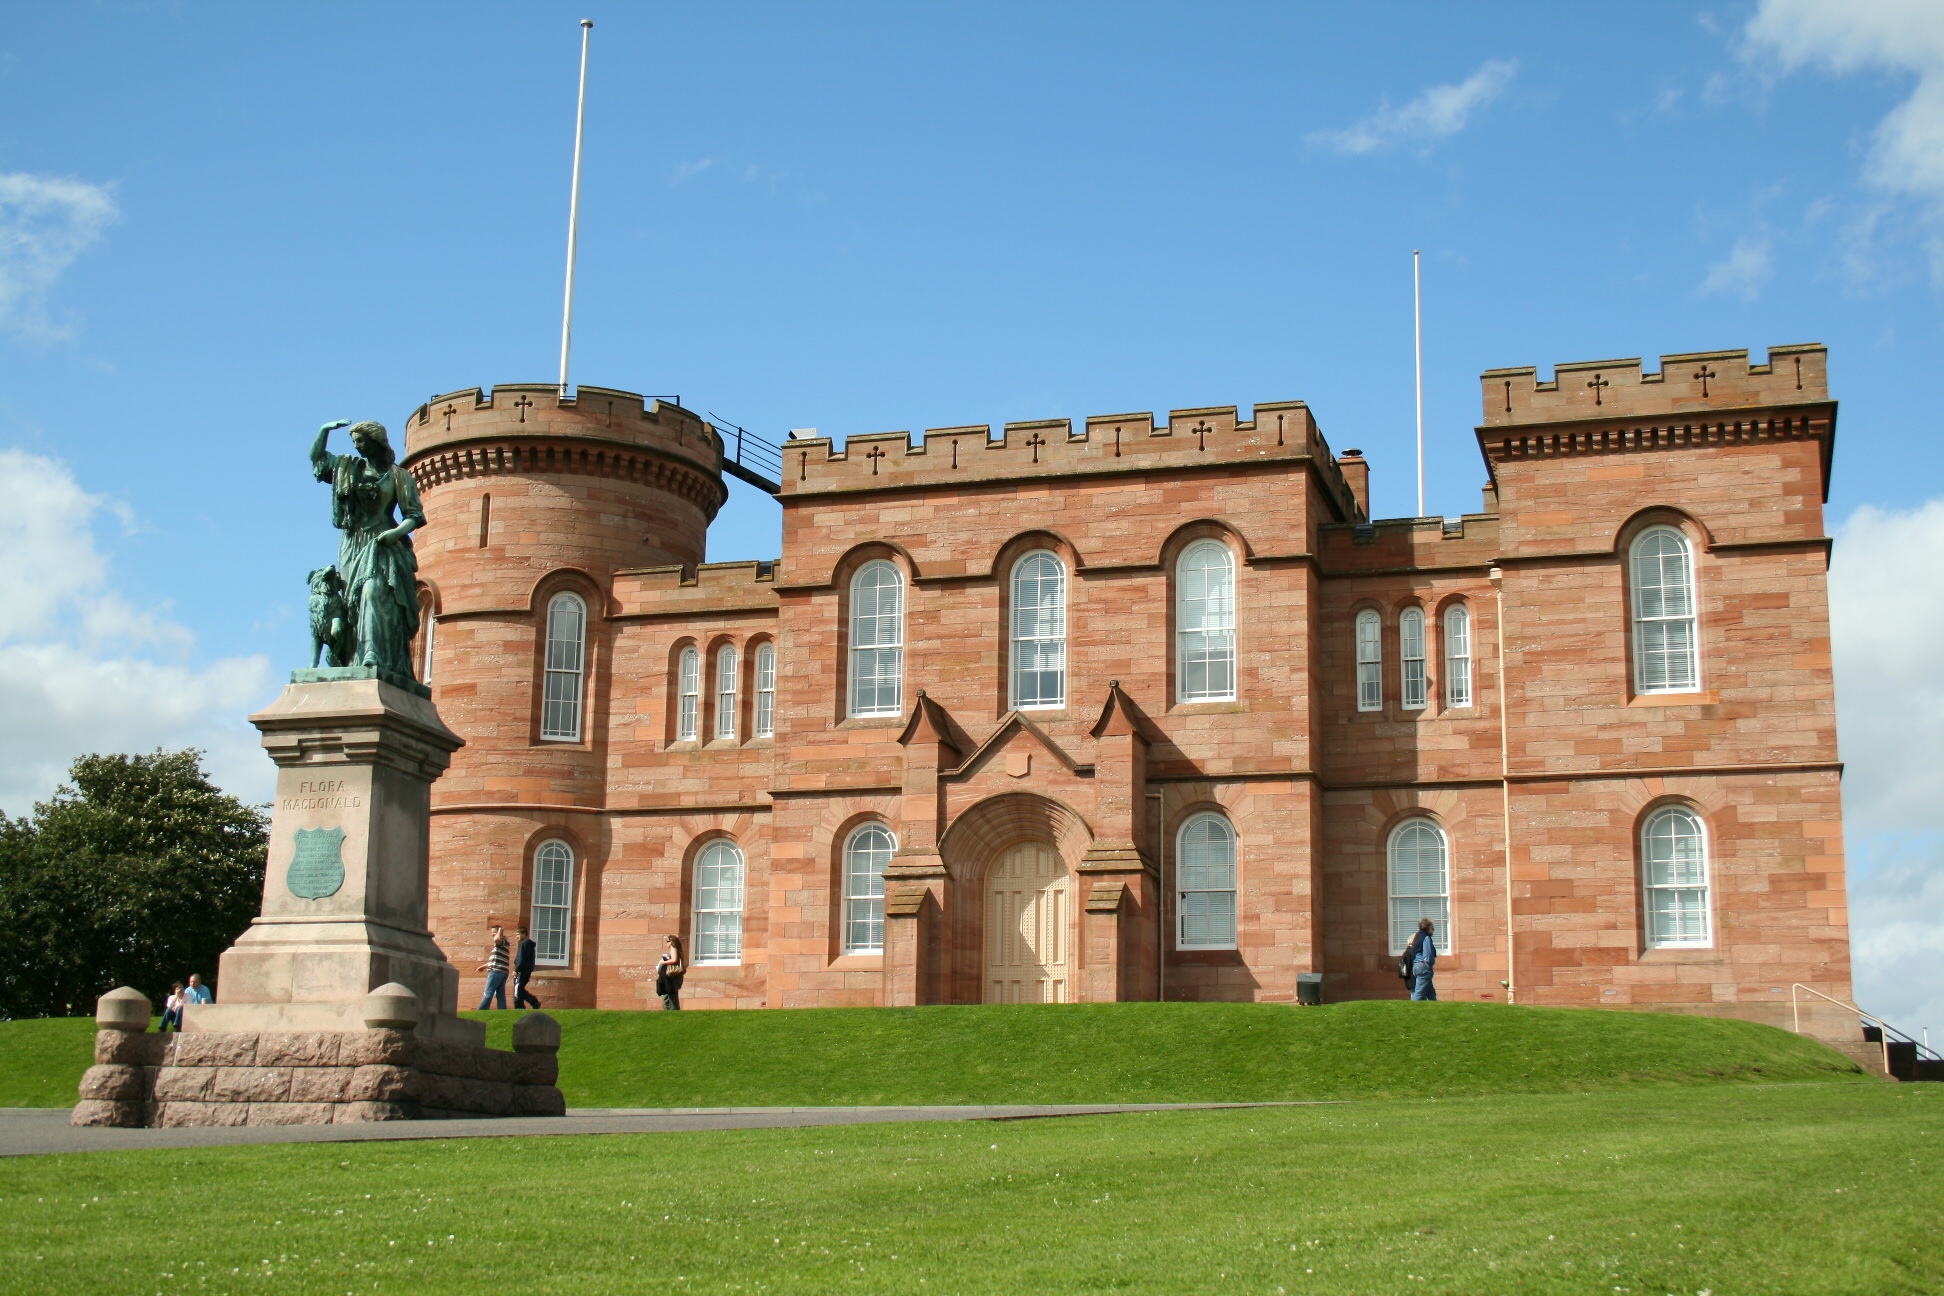 Martin is based in Inverness, Highlands.